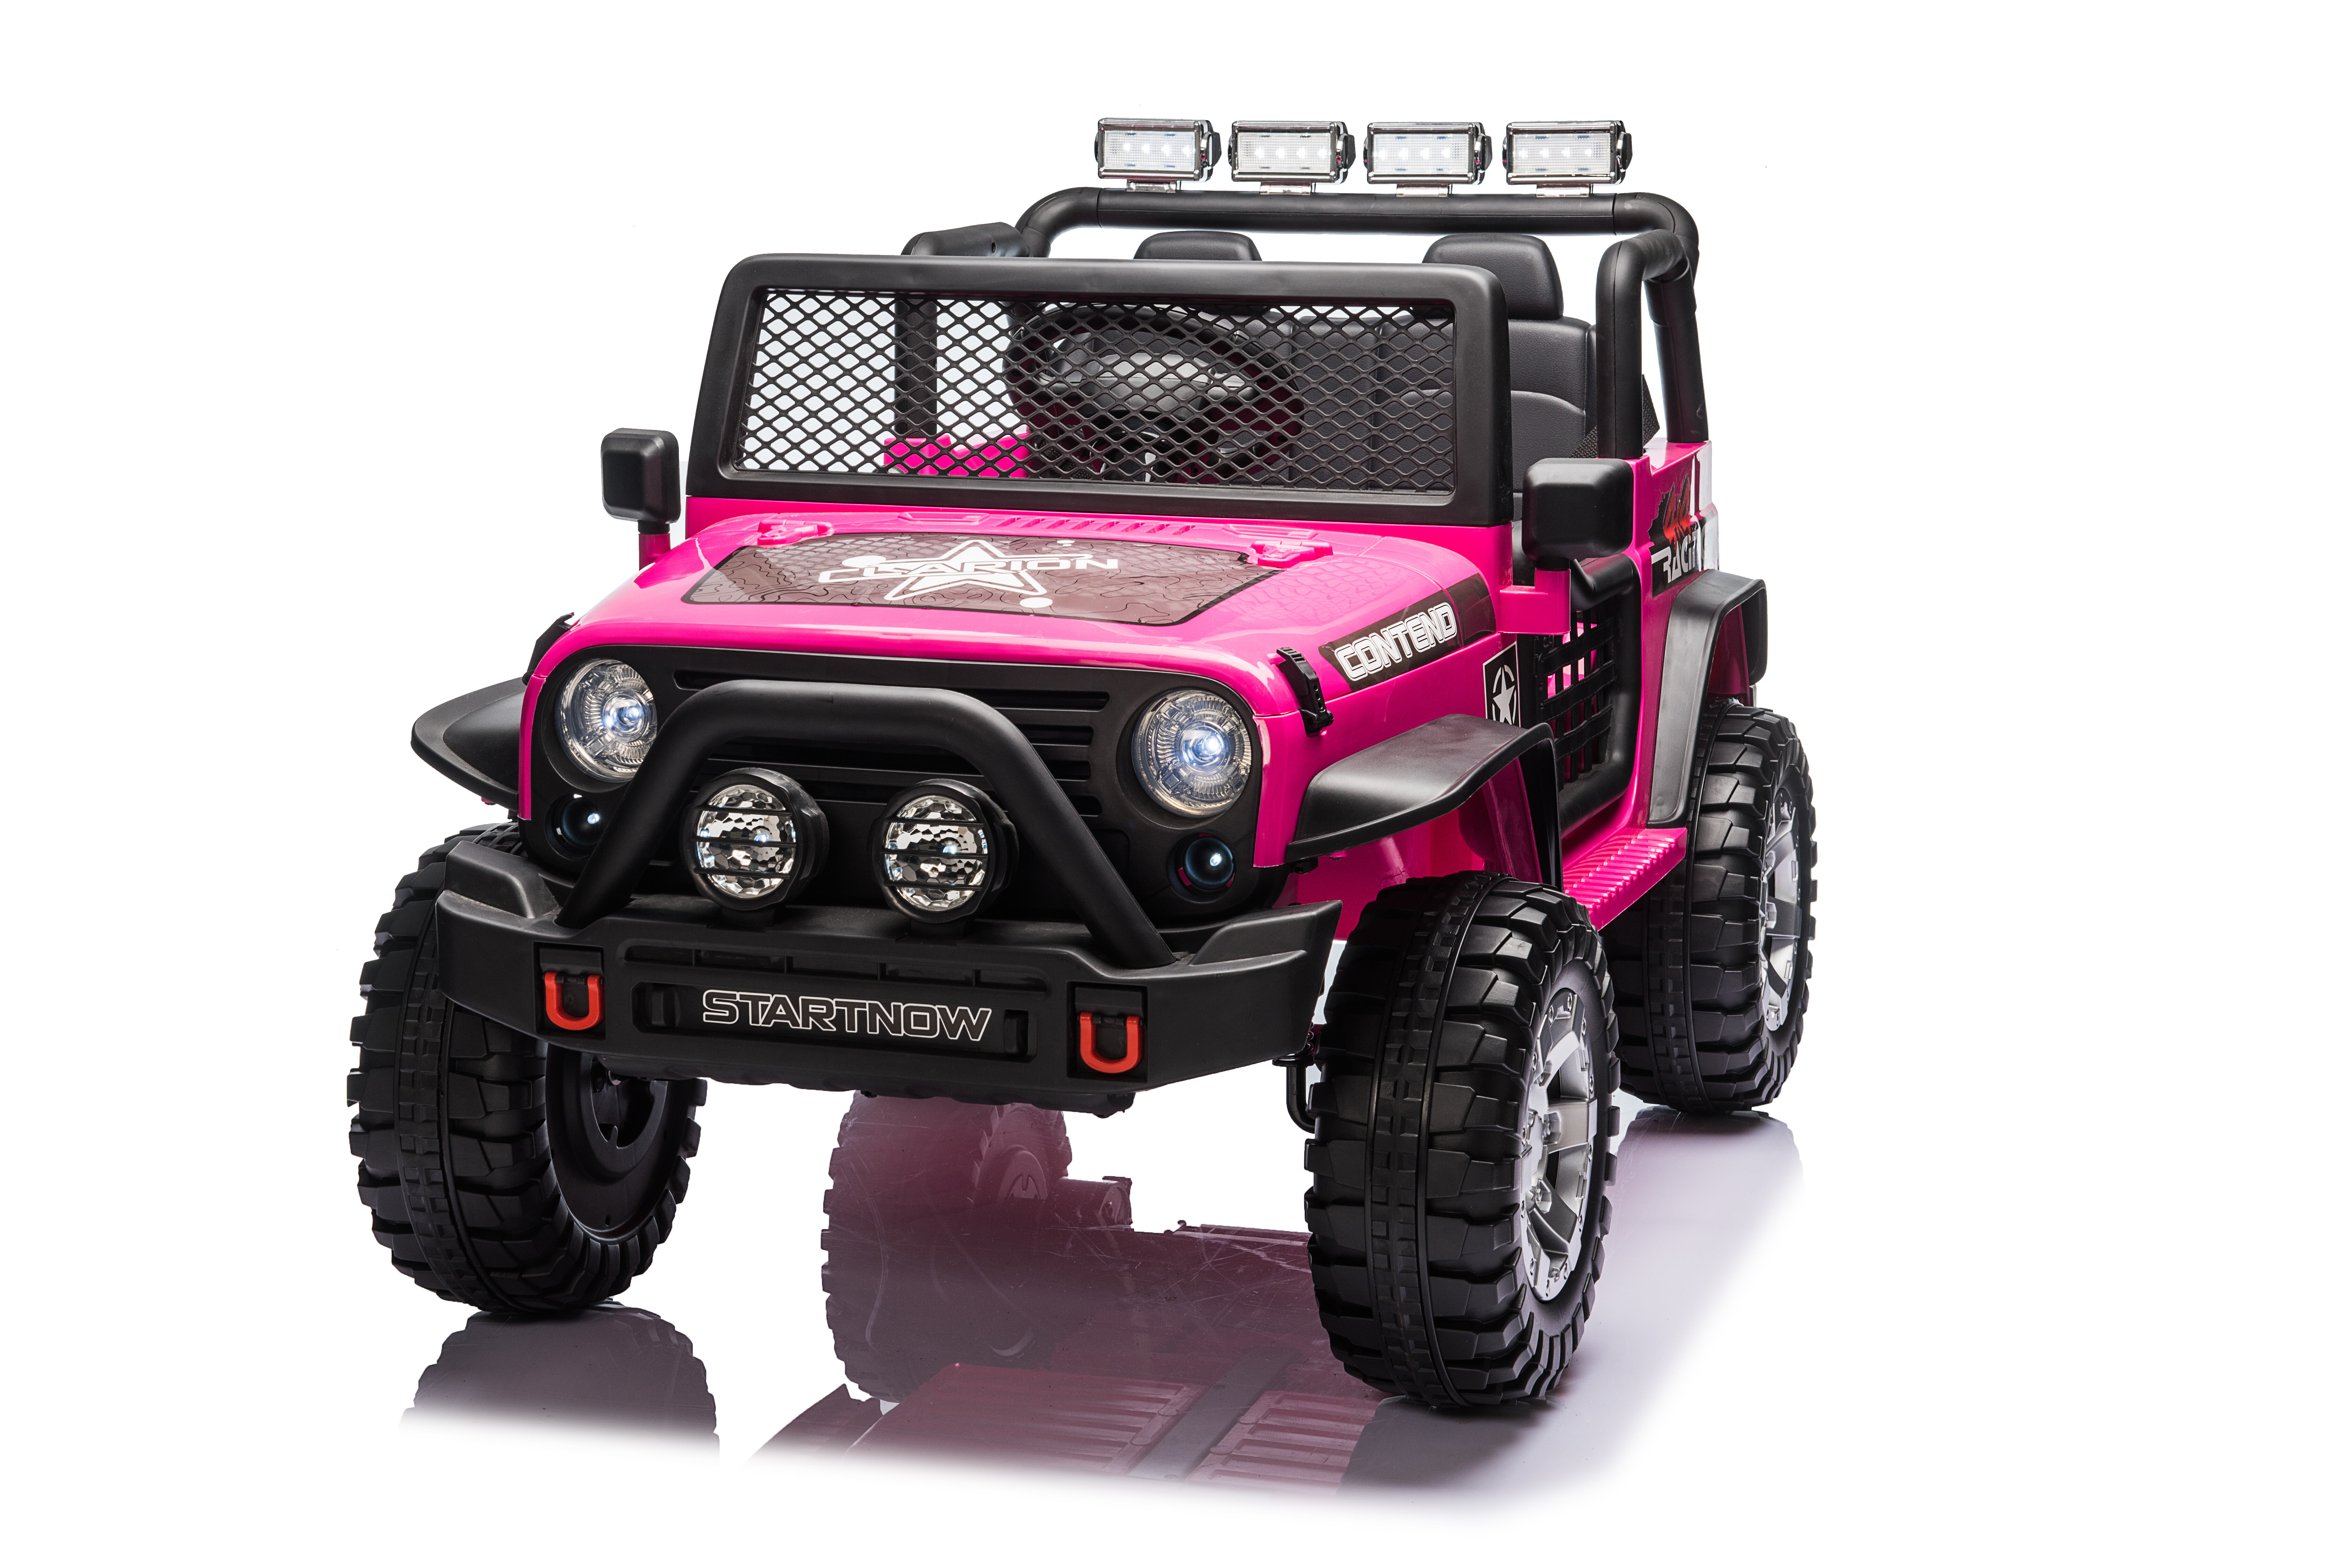 12v Kids Ride on Car Truck Toys Electric 3 Speed Mp3 LED With Remote Control for sale online 